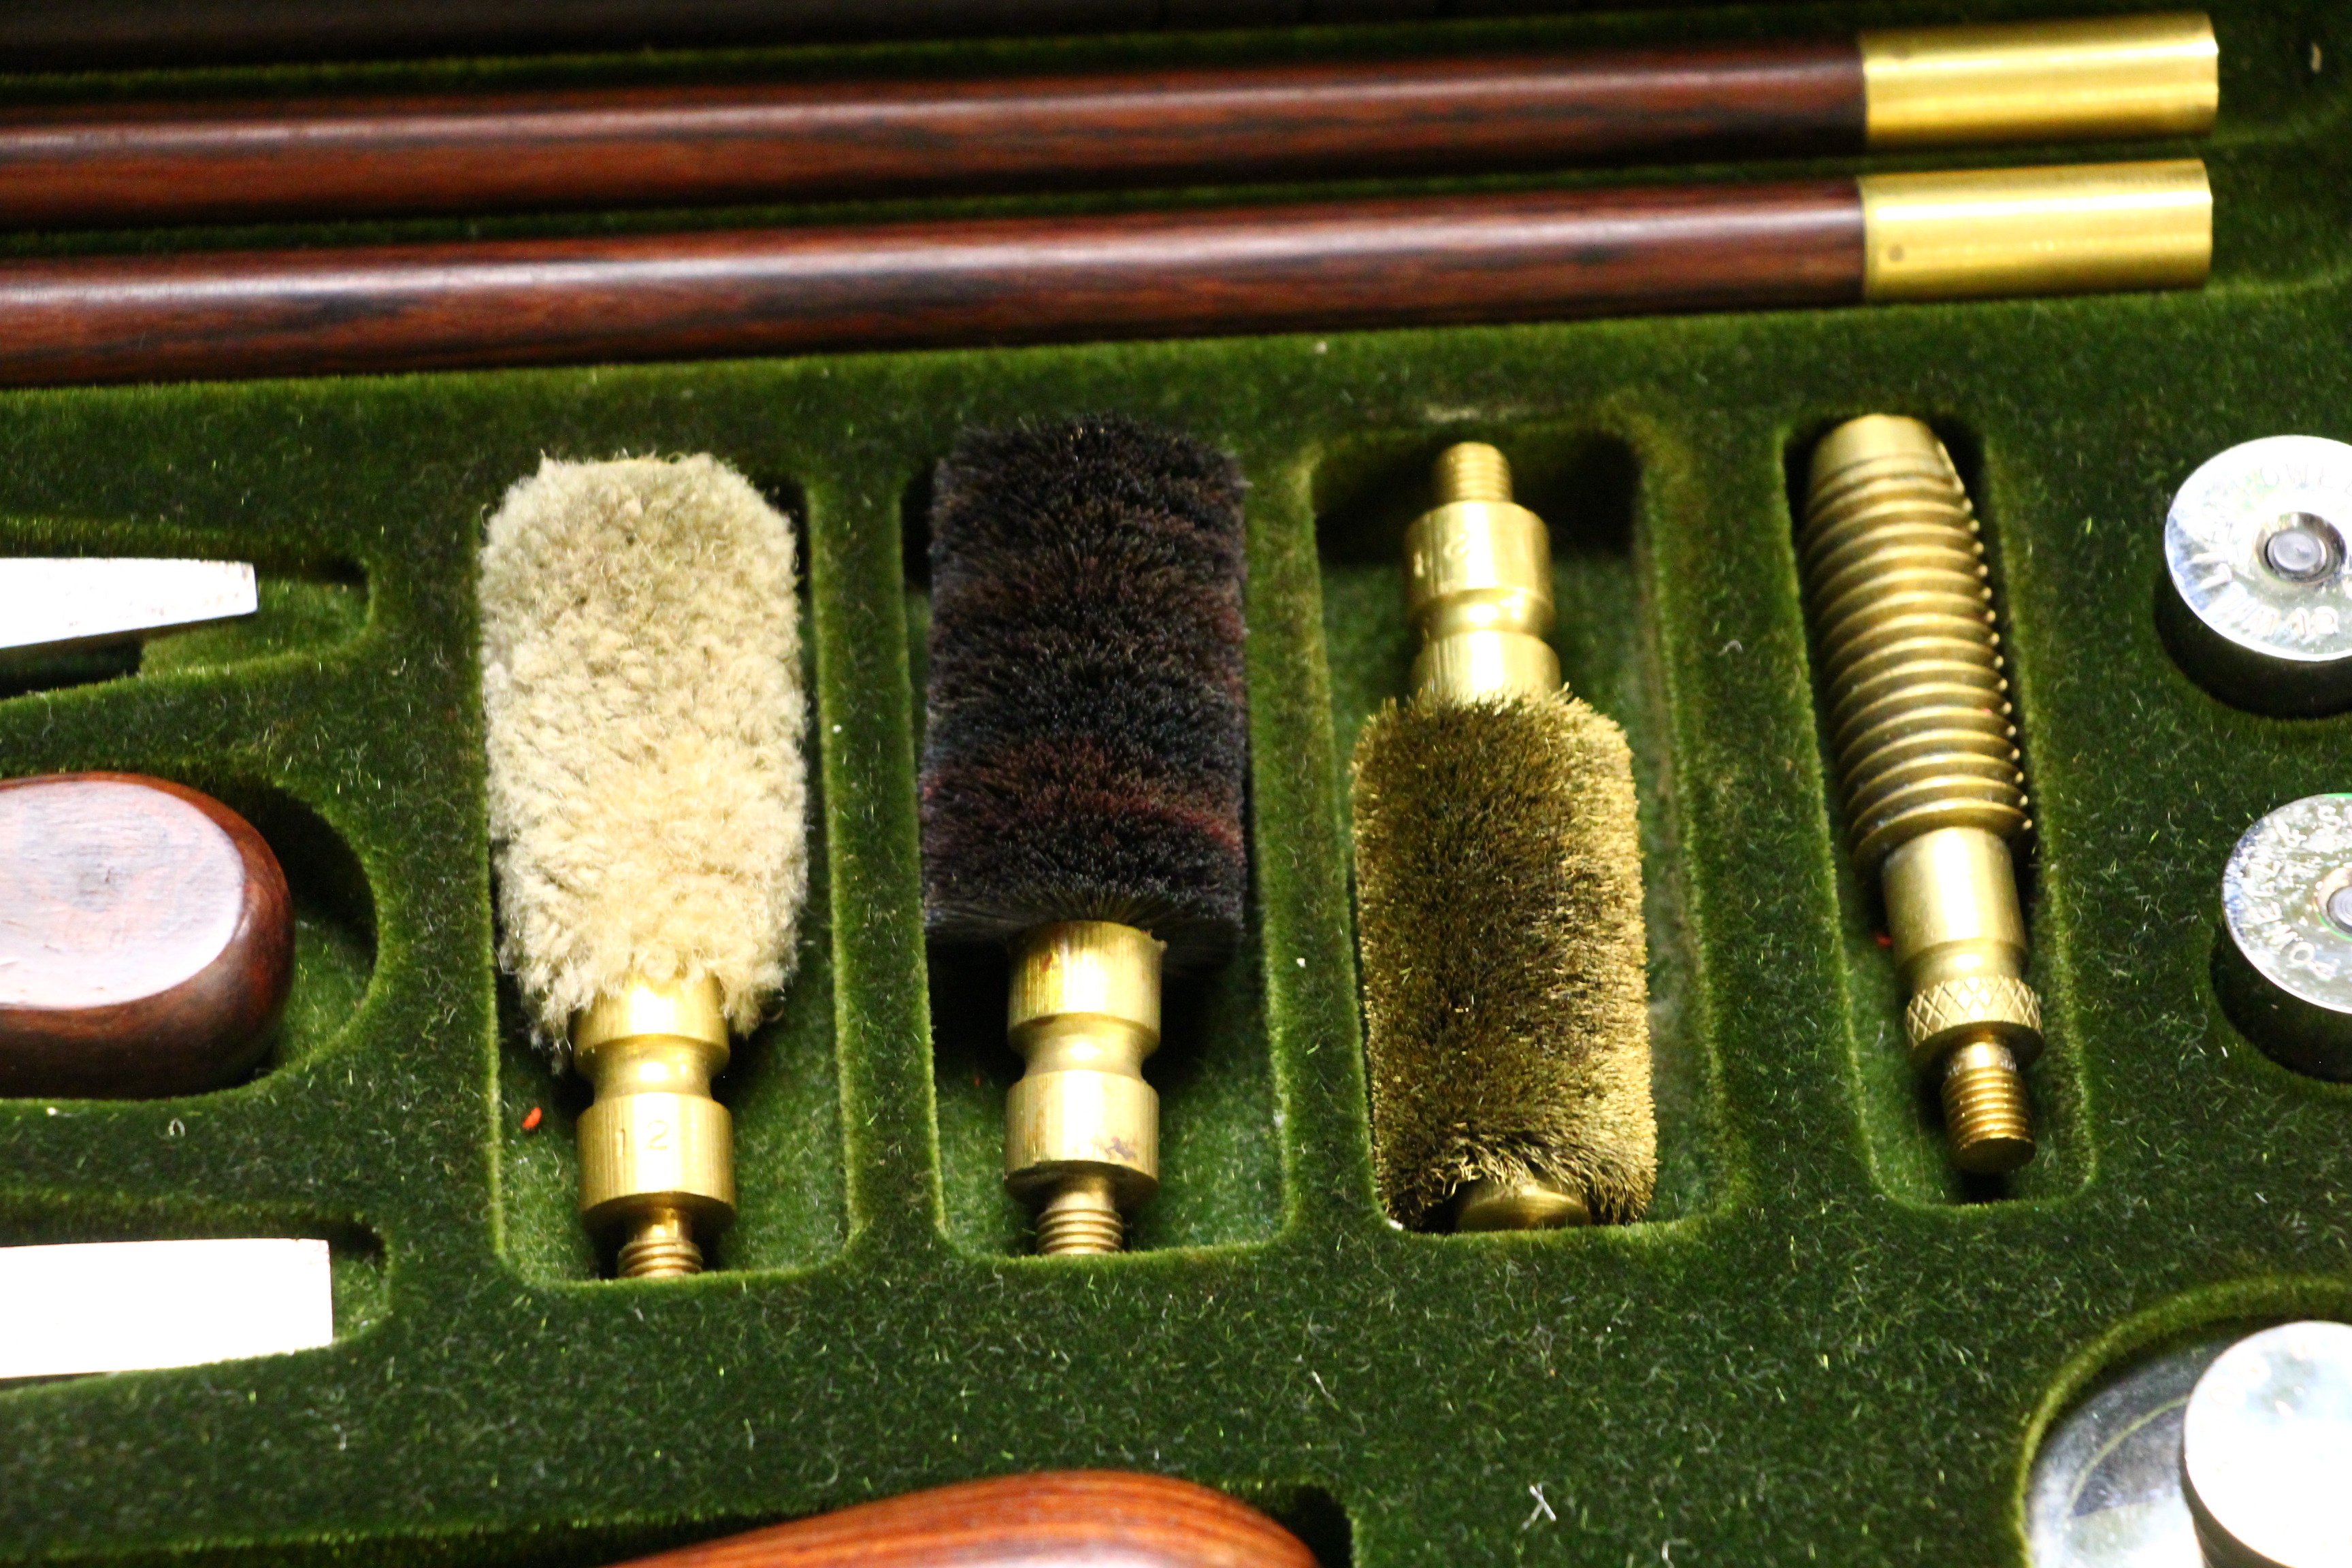 A WILLIAM POWELL CASED 12 GAUGE GUN CLEANING KIT AND ACCESSORIES - Image 5 of 9